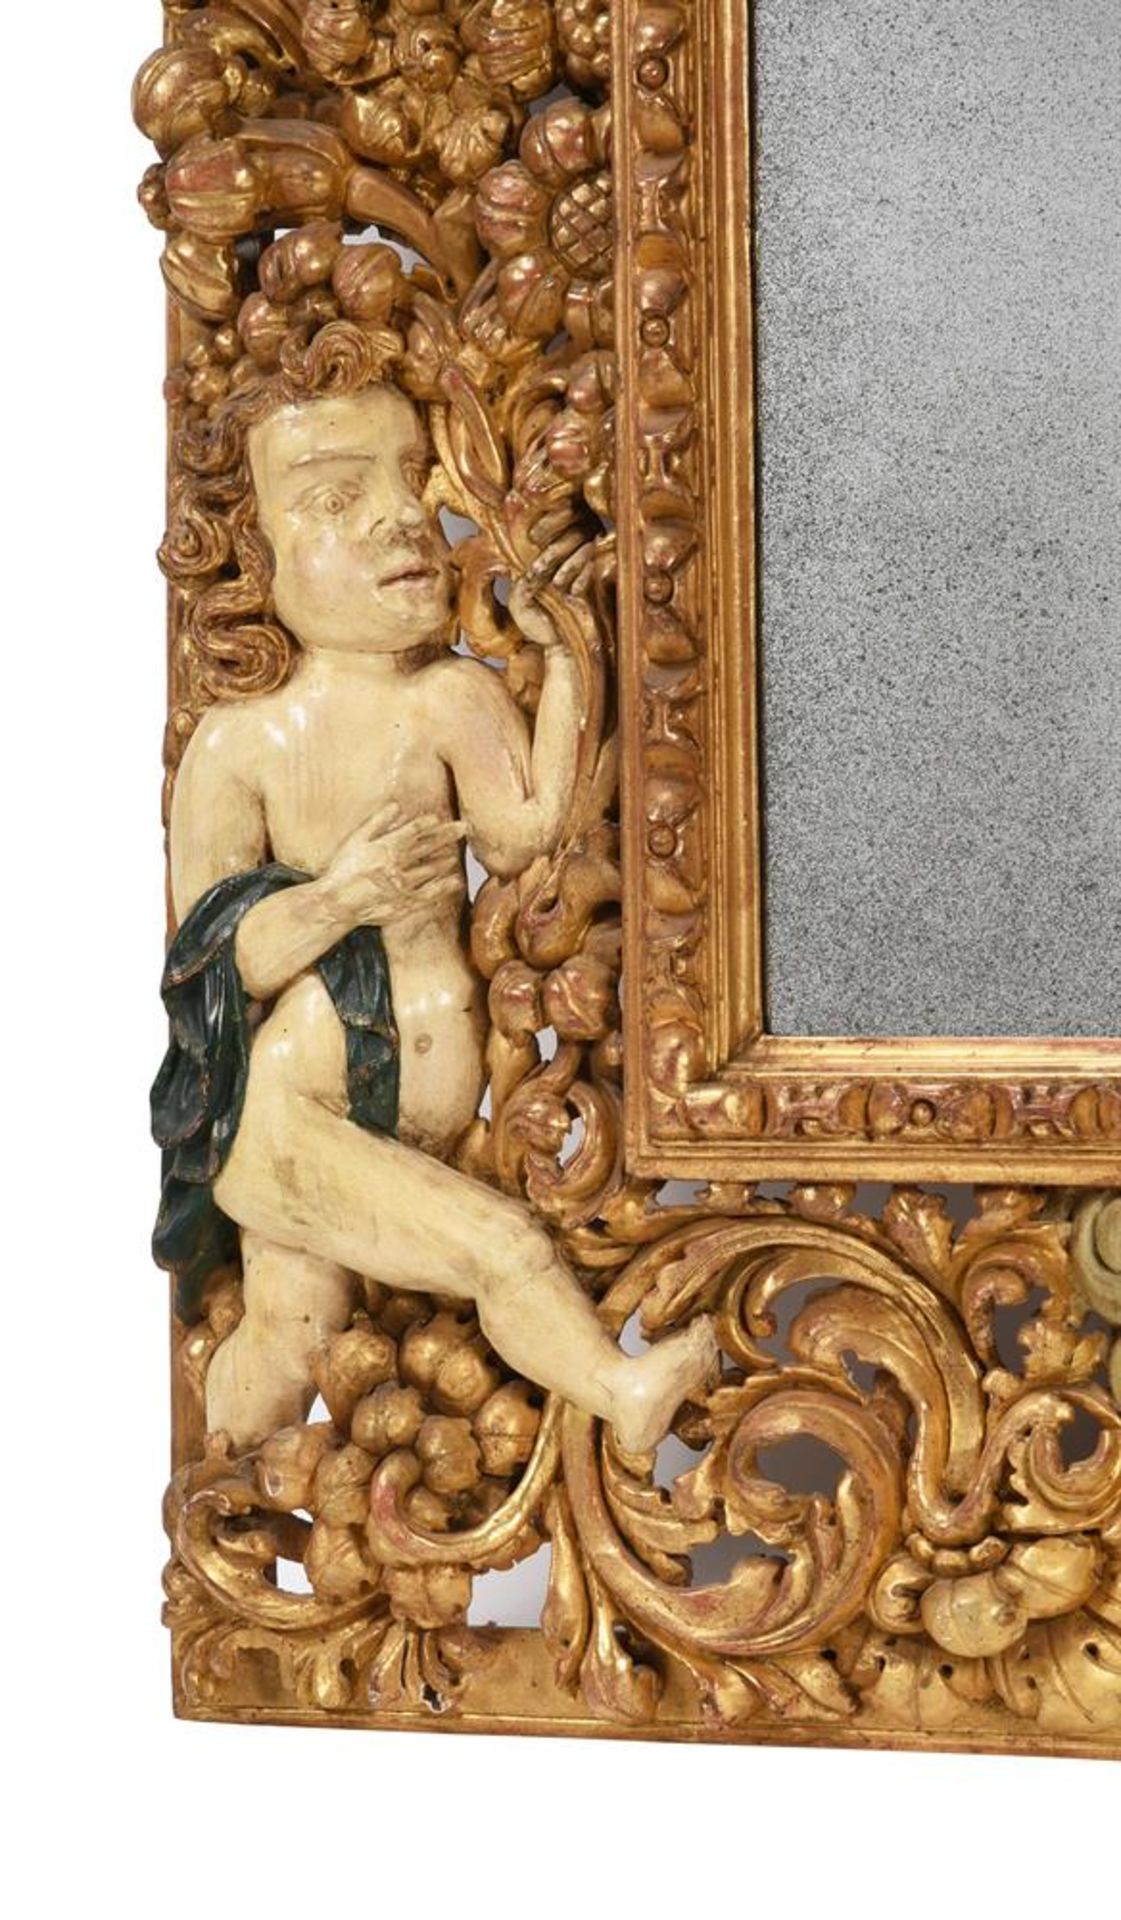 A CONTINENTAL CARVED GILTWOOD AND PAINTED MIRROR, SOUTH GERMAN OR AUSTRIAN, 17TH CENTURY AND LATER - Image 4 of 6